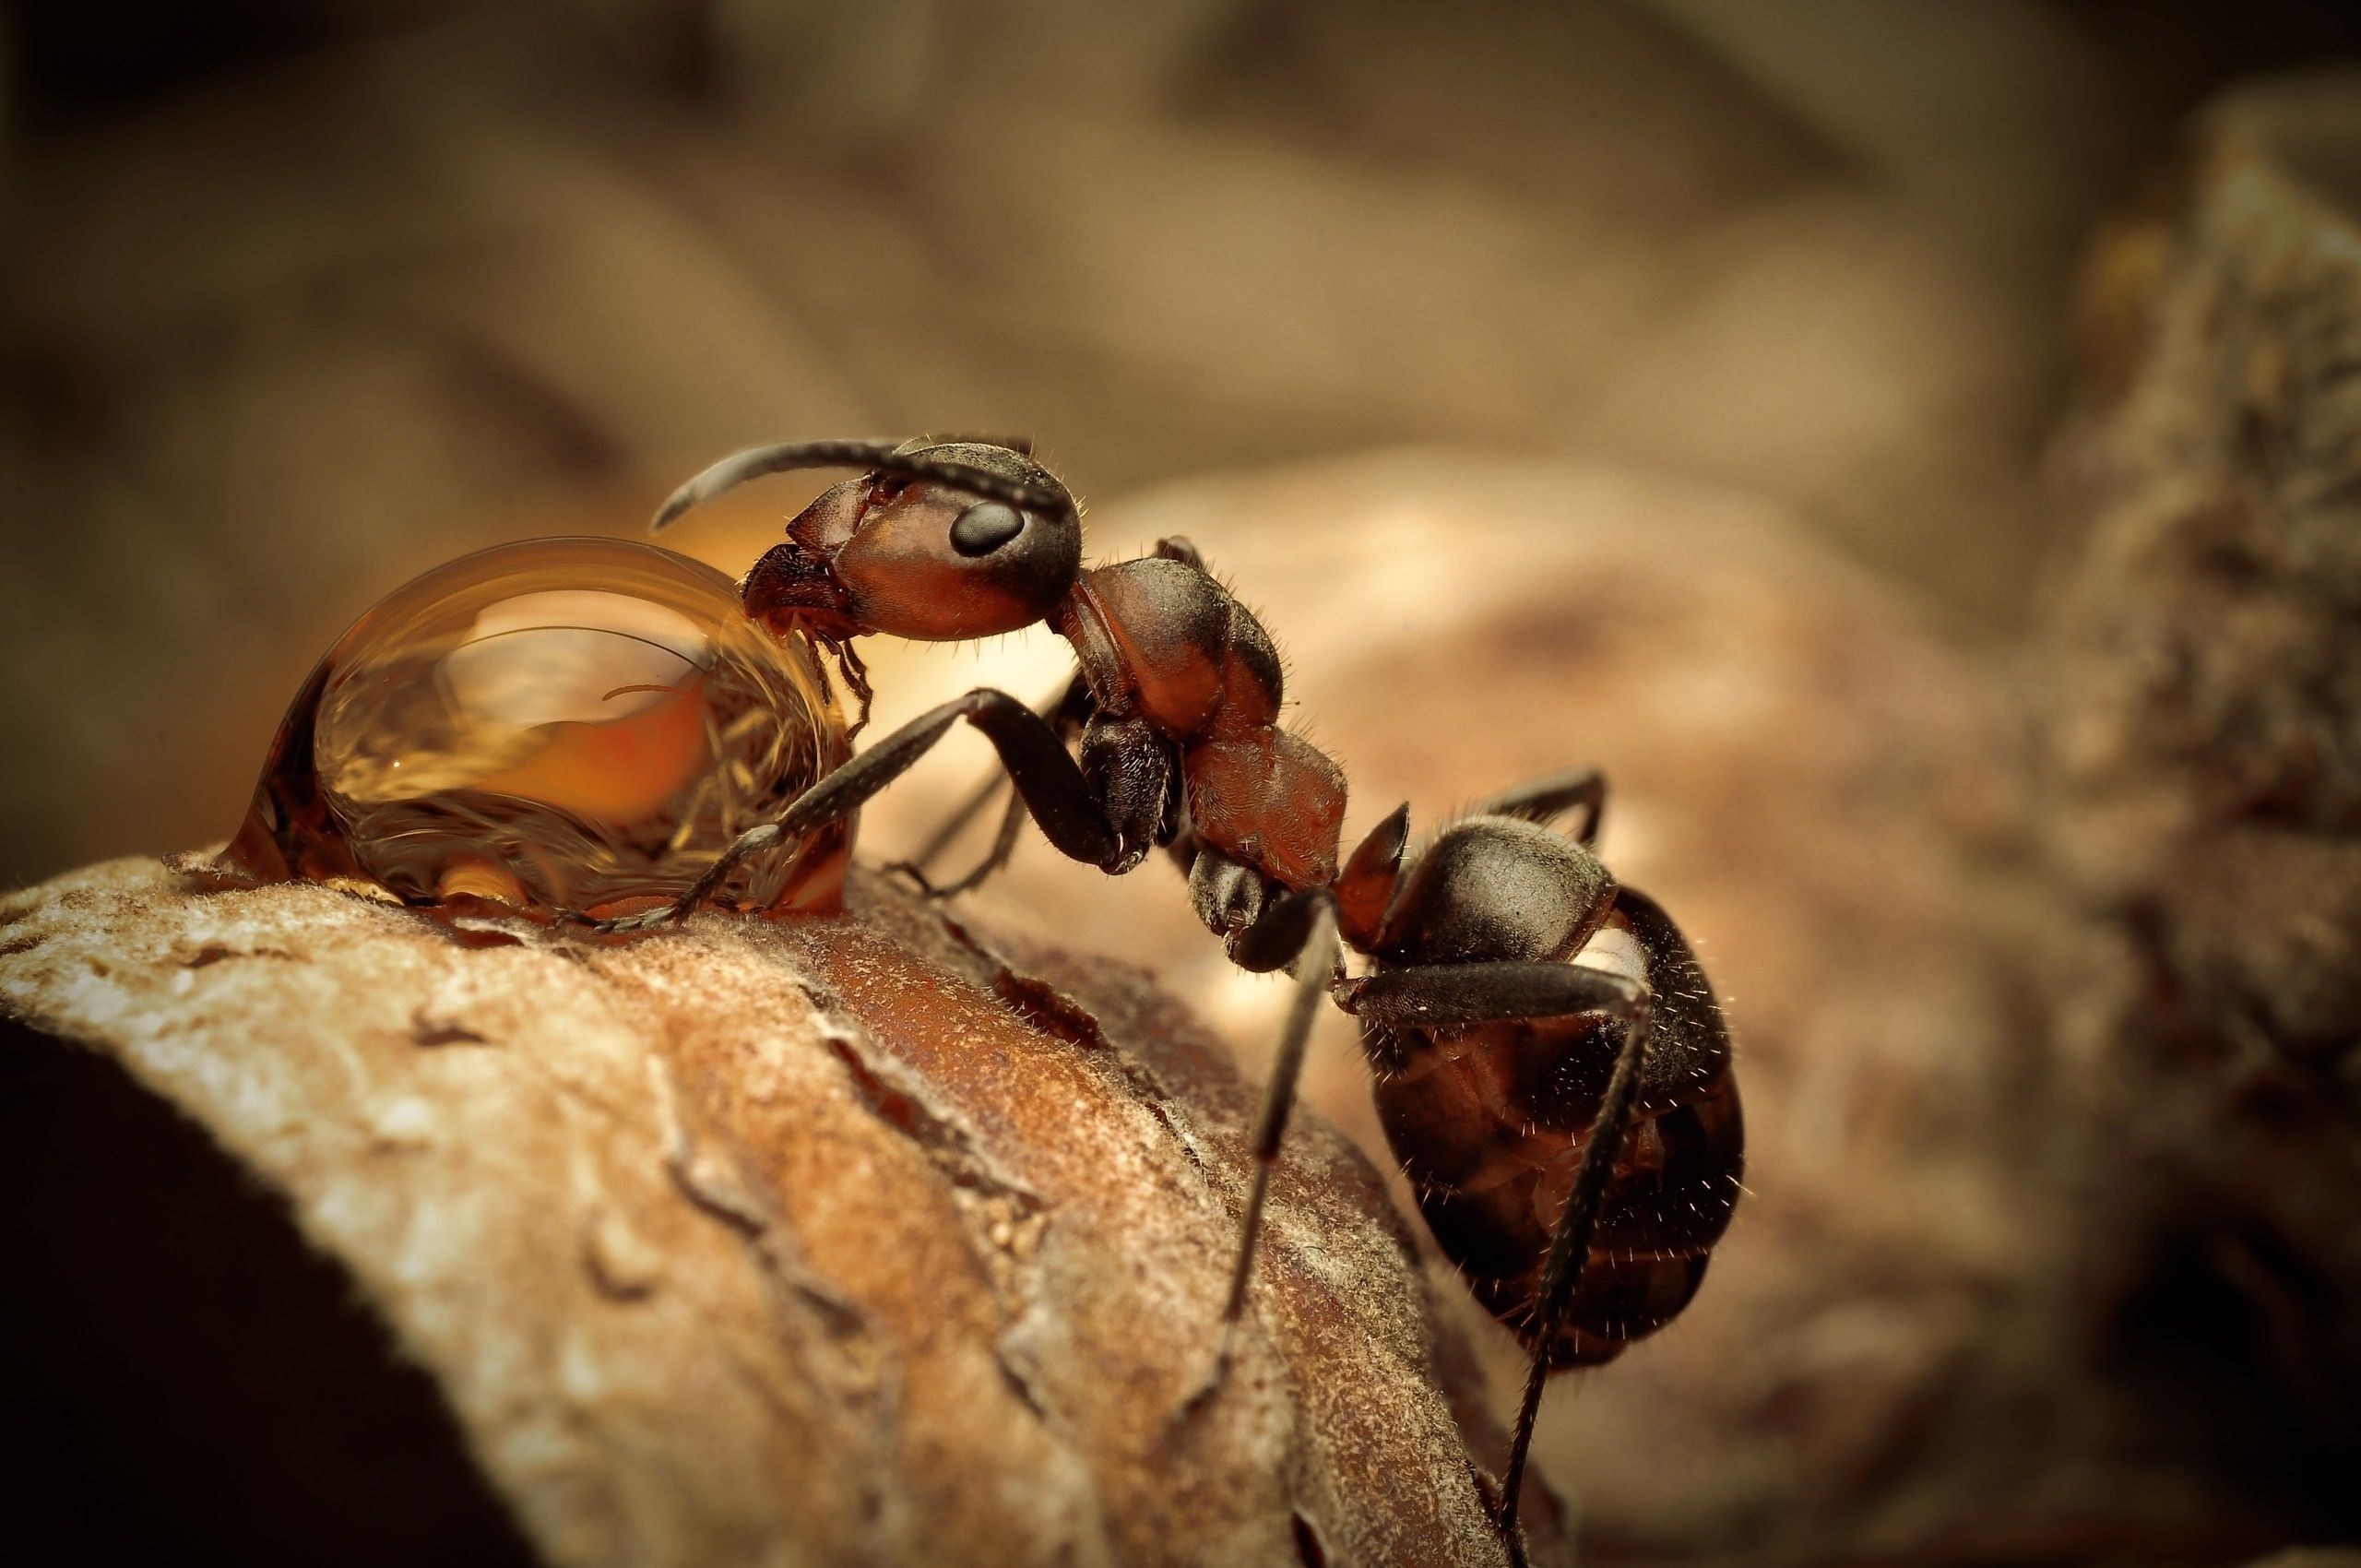 ants wallpaper HD 4 Pix. Ants, Ant insect, Animal photo